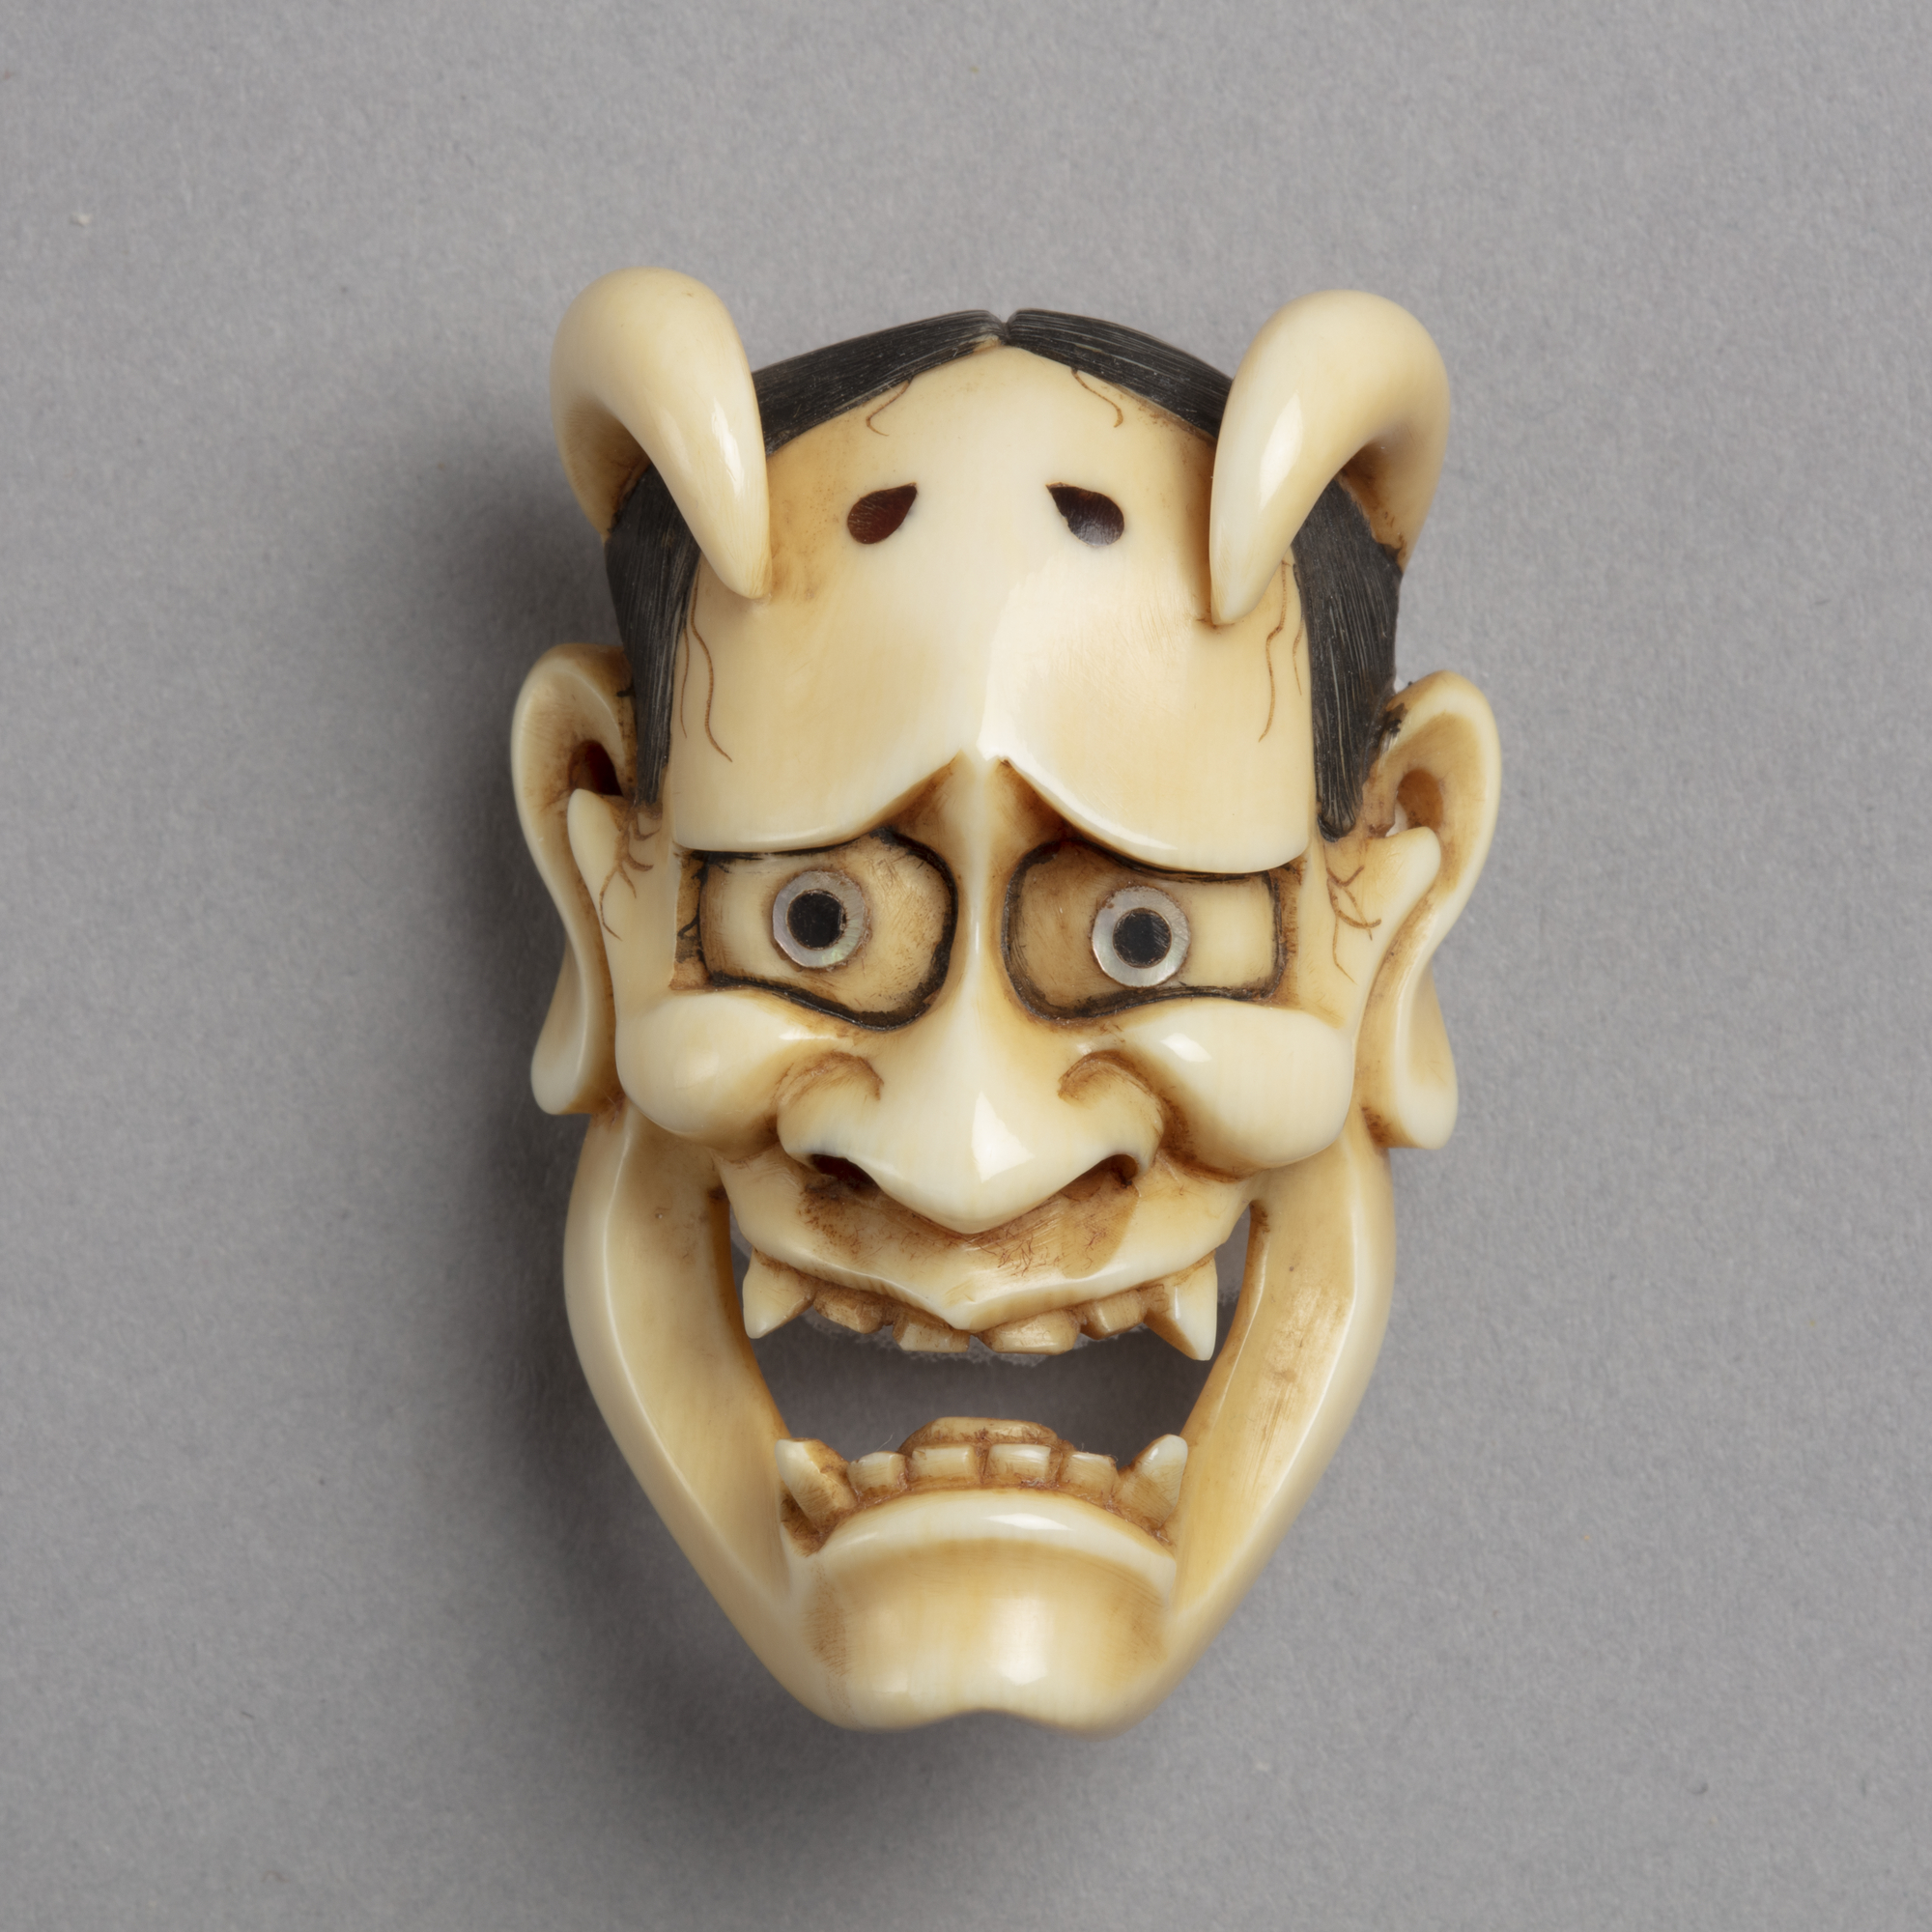 A Japanese ivory mask netsuke of Hannya the face of a jealous woman who took on the features of a demon including its horns.